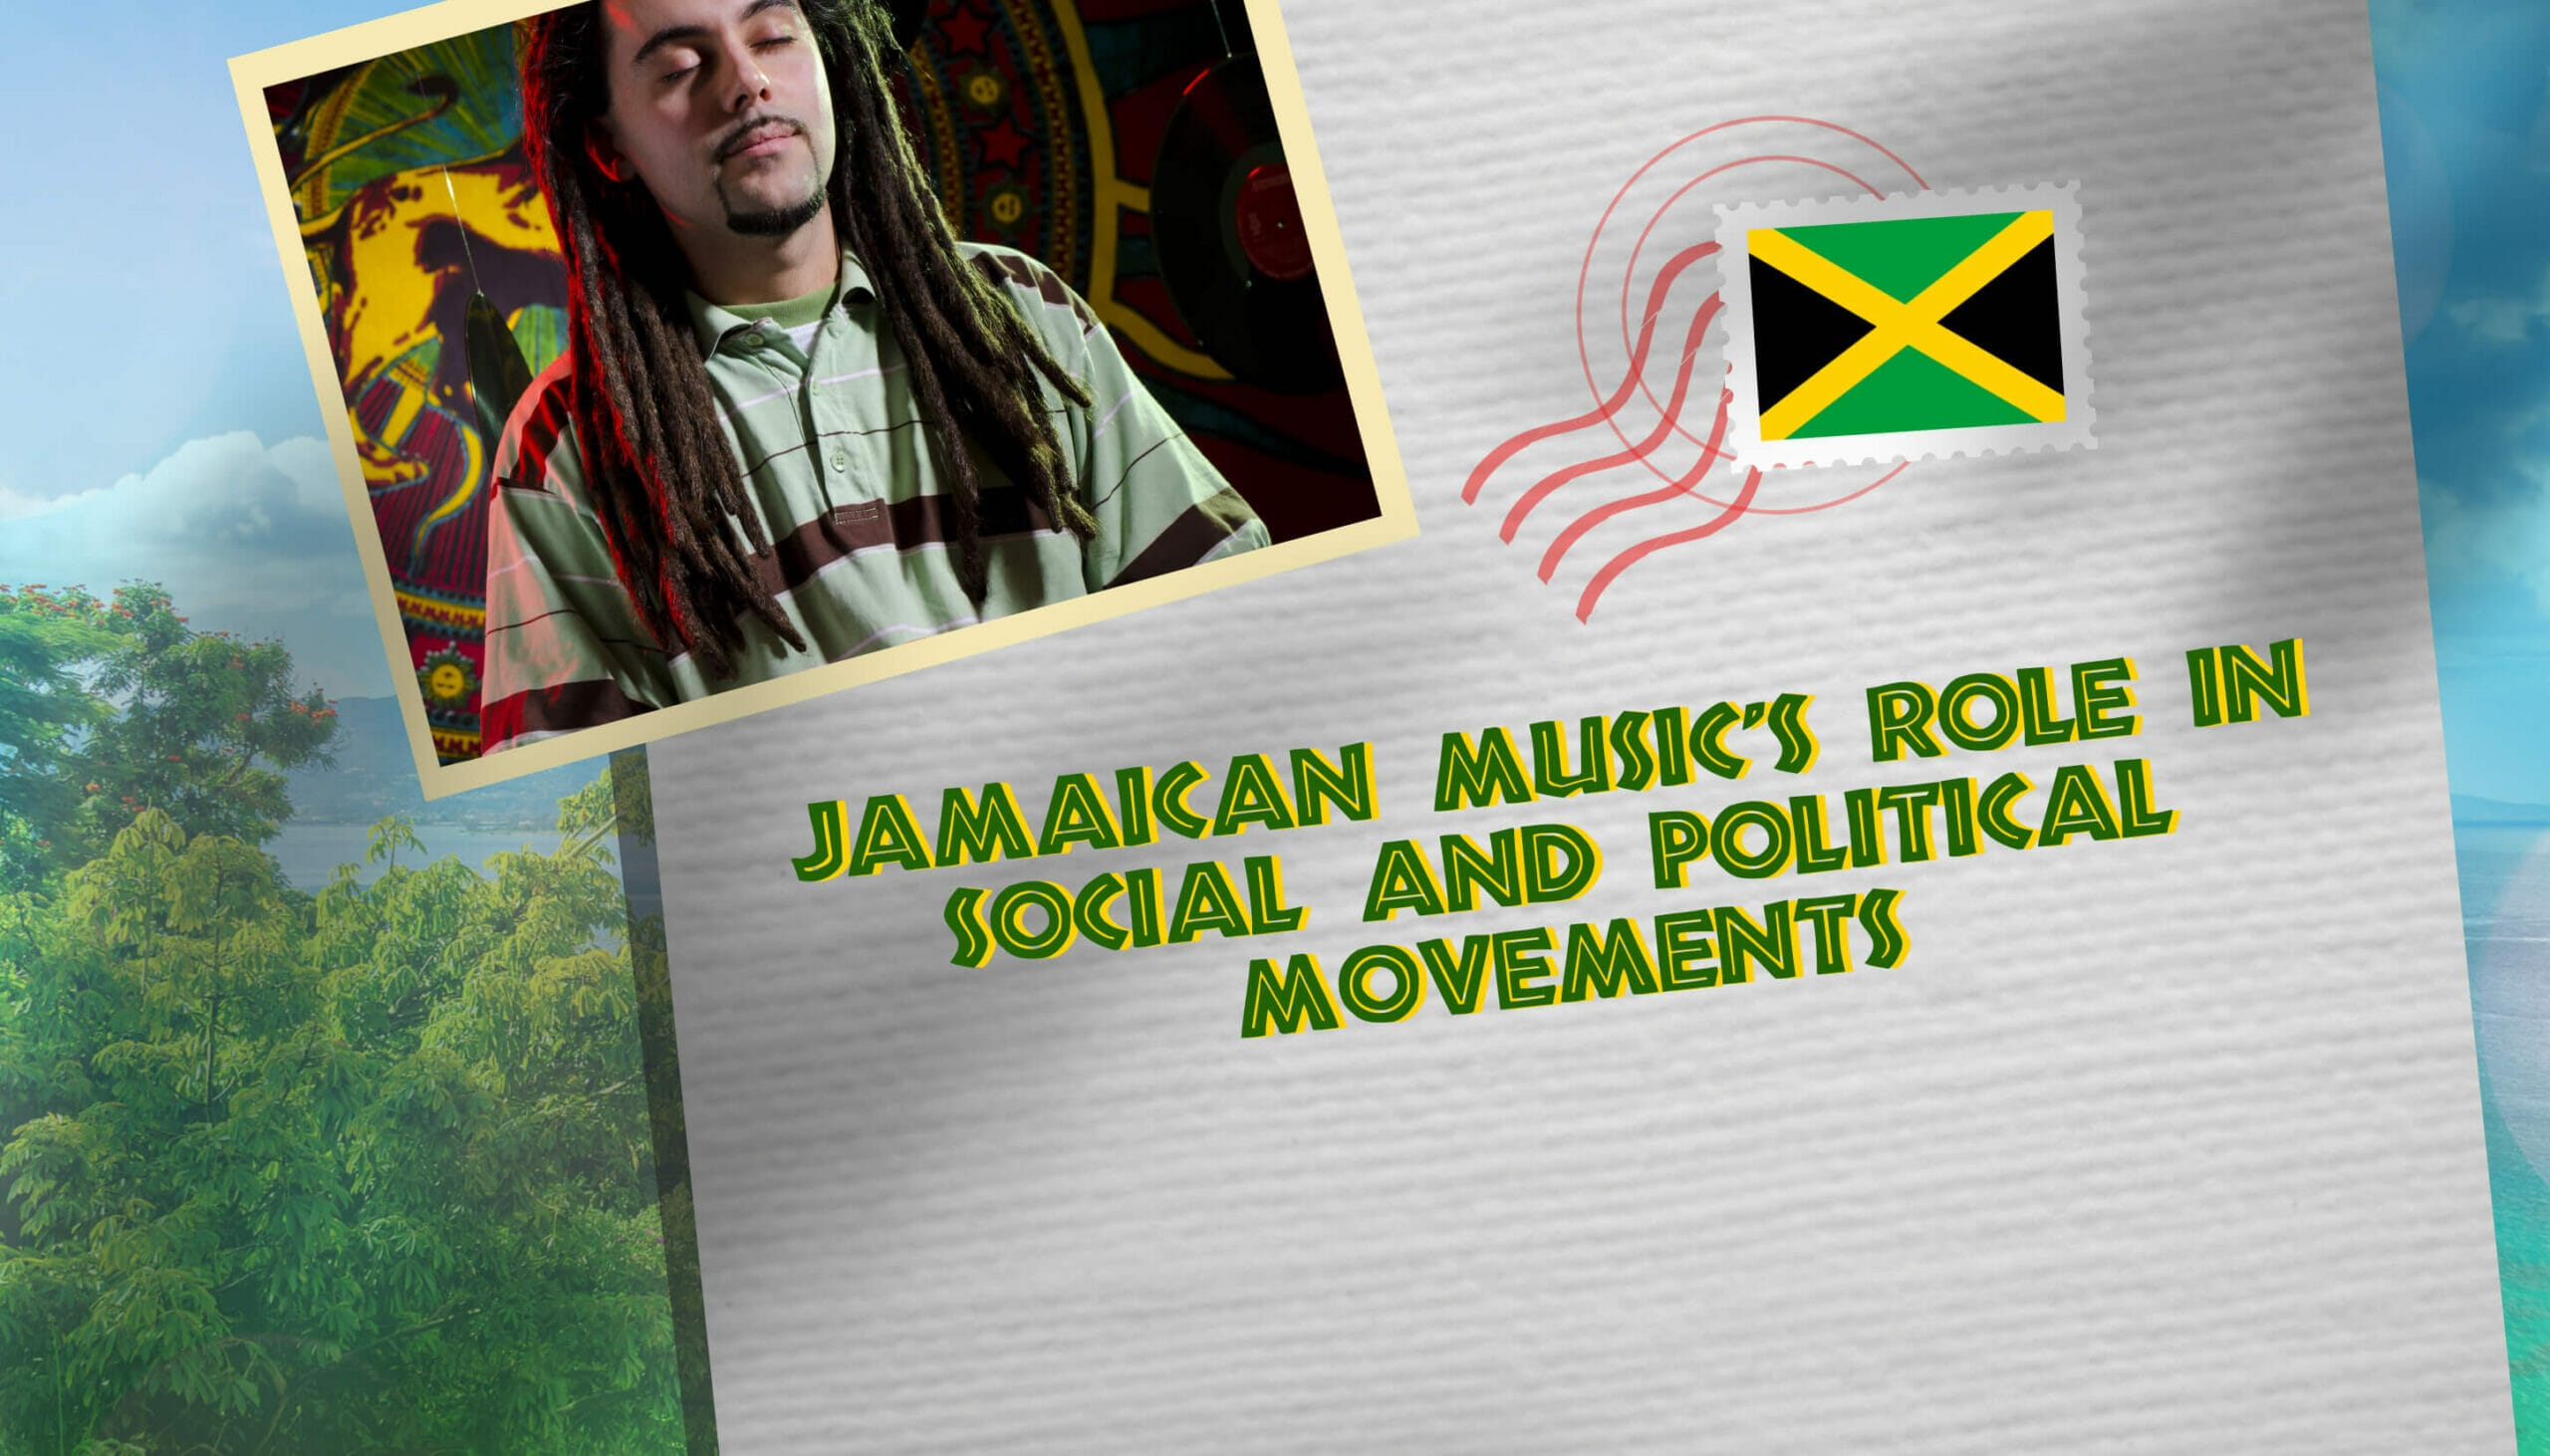 Jamaican music's role in social and political movements